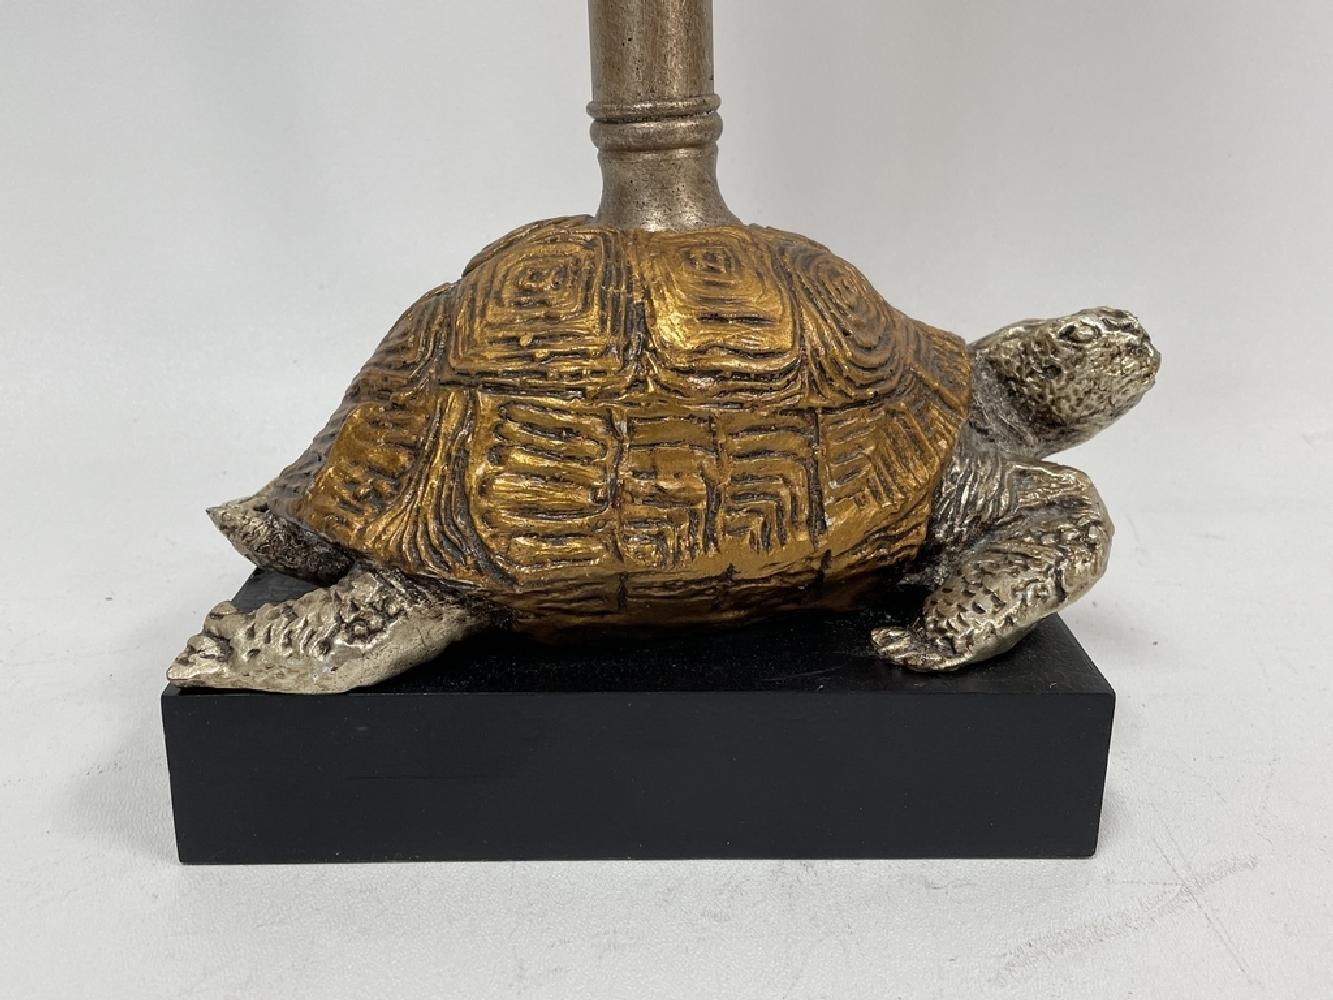 Anonymous, in the manner of Maitland-Smith
20th century; USA
Brass, marble

Approximate size: 25 x 8 x 5 in.

This distinctive Hollywood Regency style lamp, featuring a silver and gold patinated brass tortoise base and bamboo stem, is surmounted by